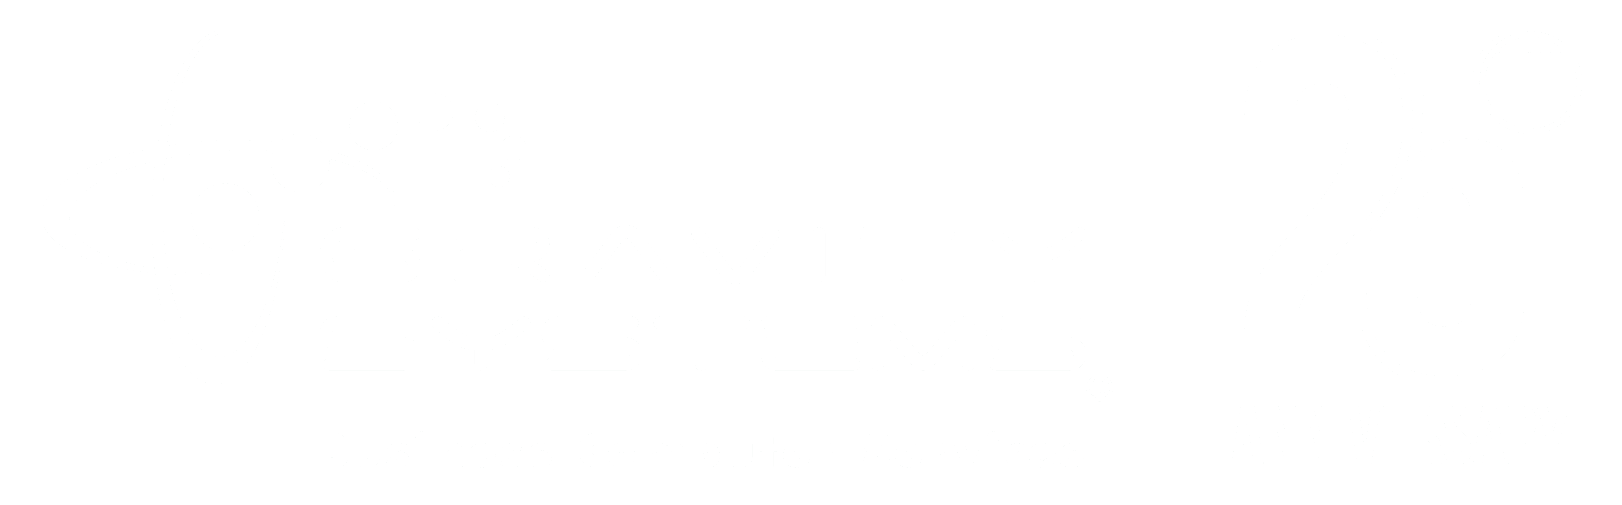 Gravity Systems 25 